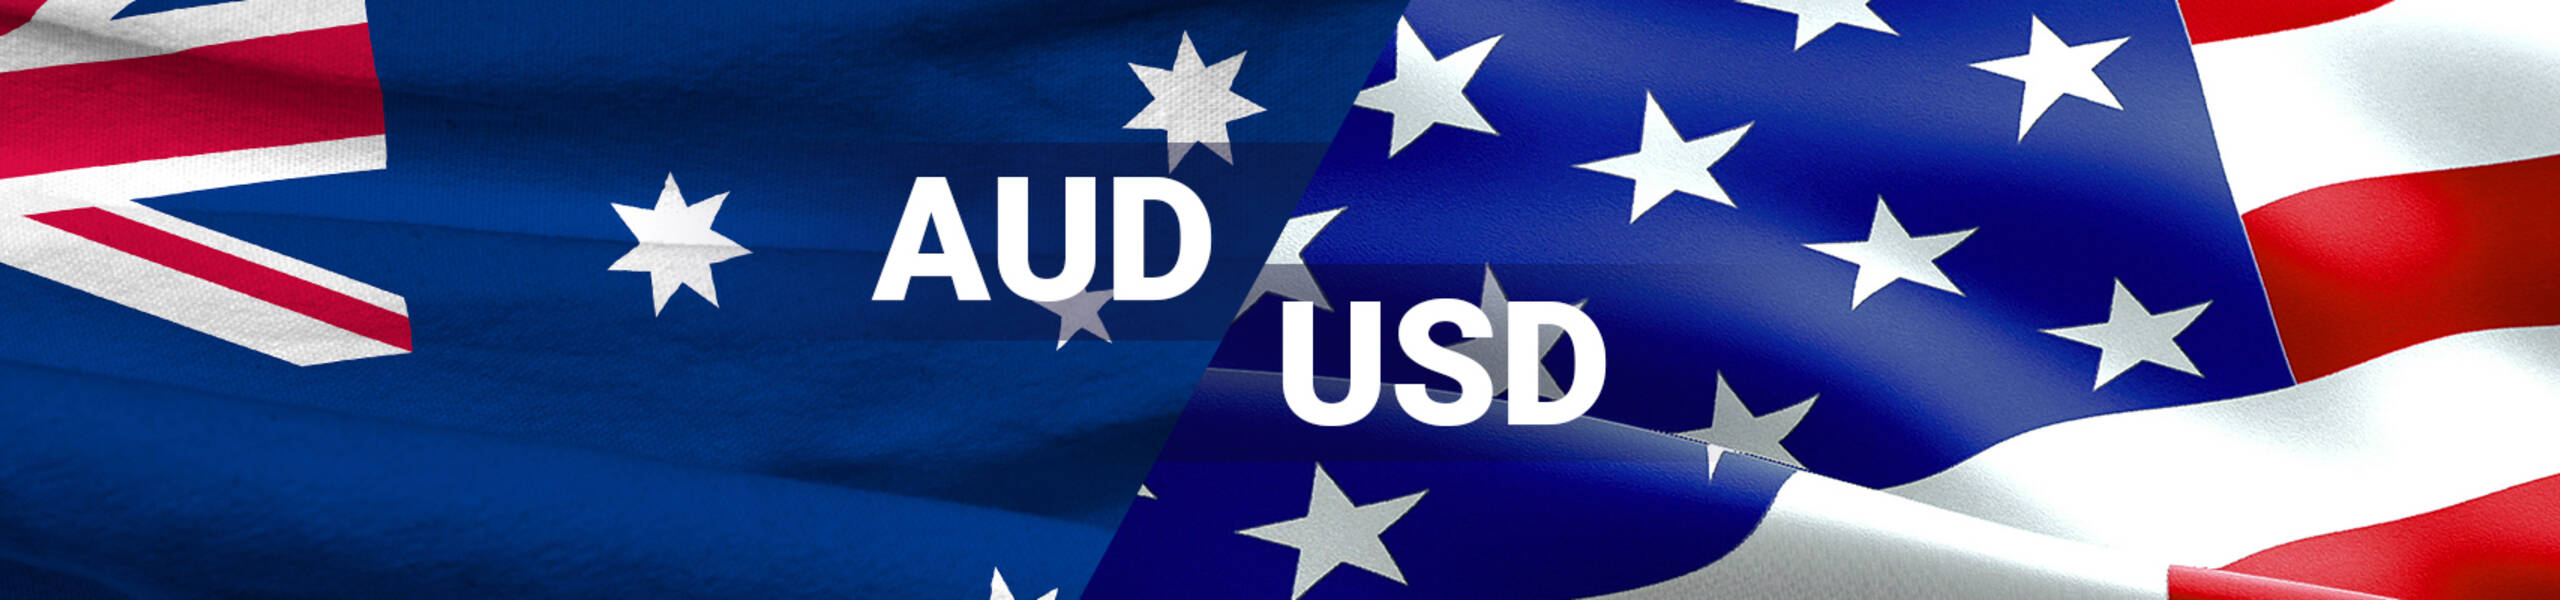 AUD/USD targets 0.7744 after a rebound